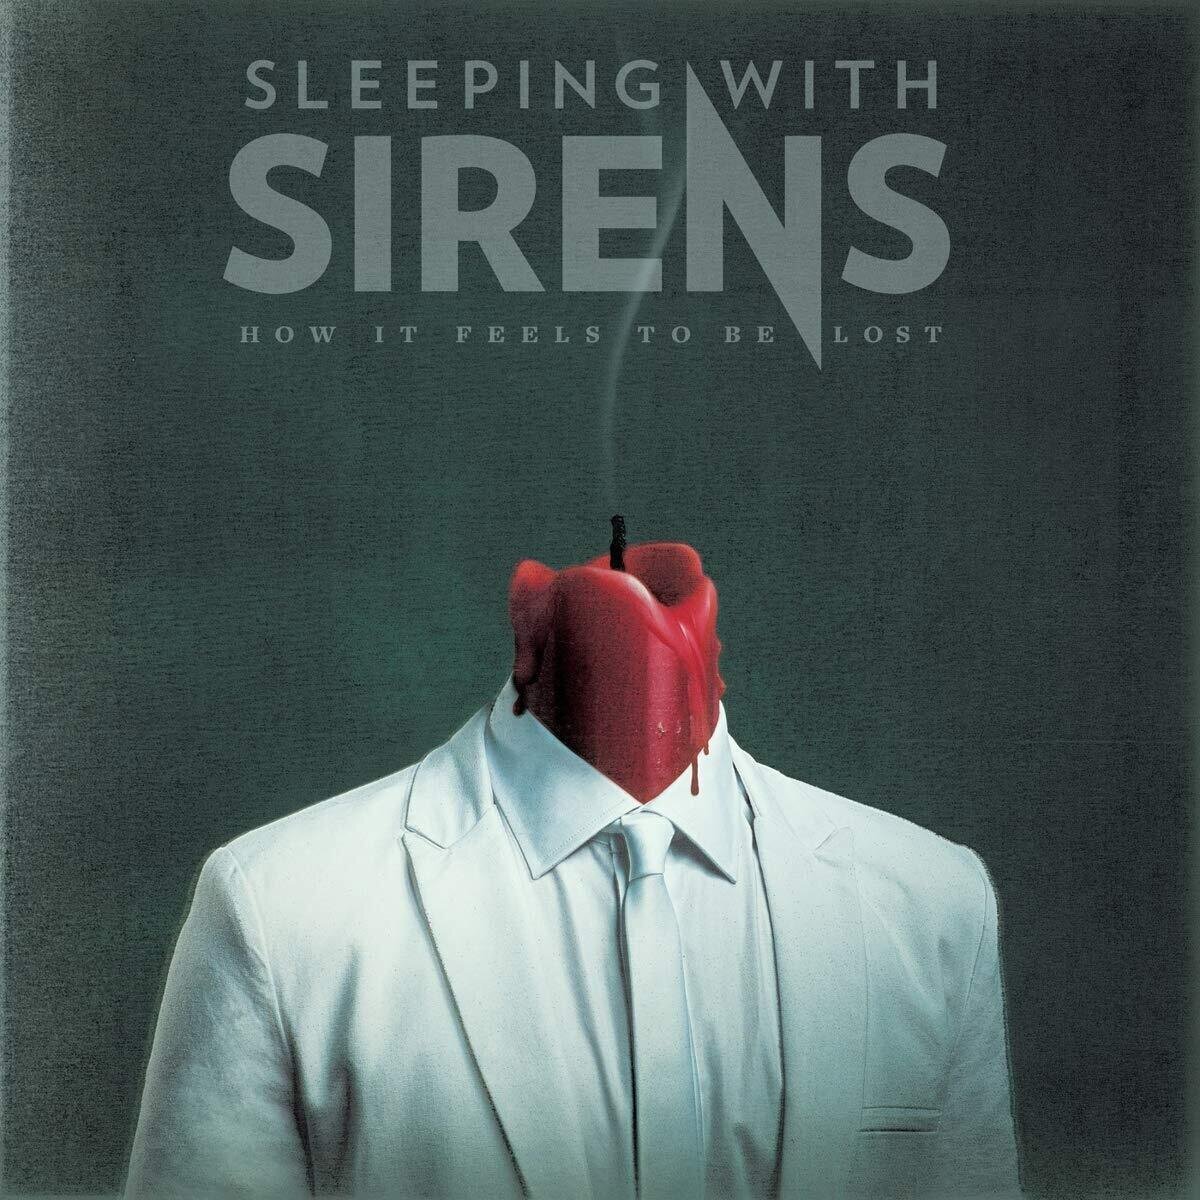 Vinyl Record Sleeping With Sirens - How It Feels To Be Lost (White/Pink Splatter) (LP)